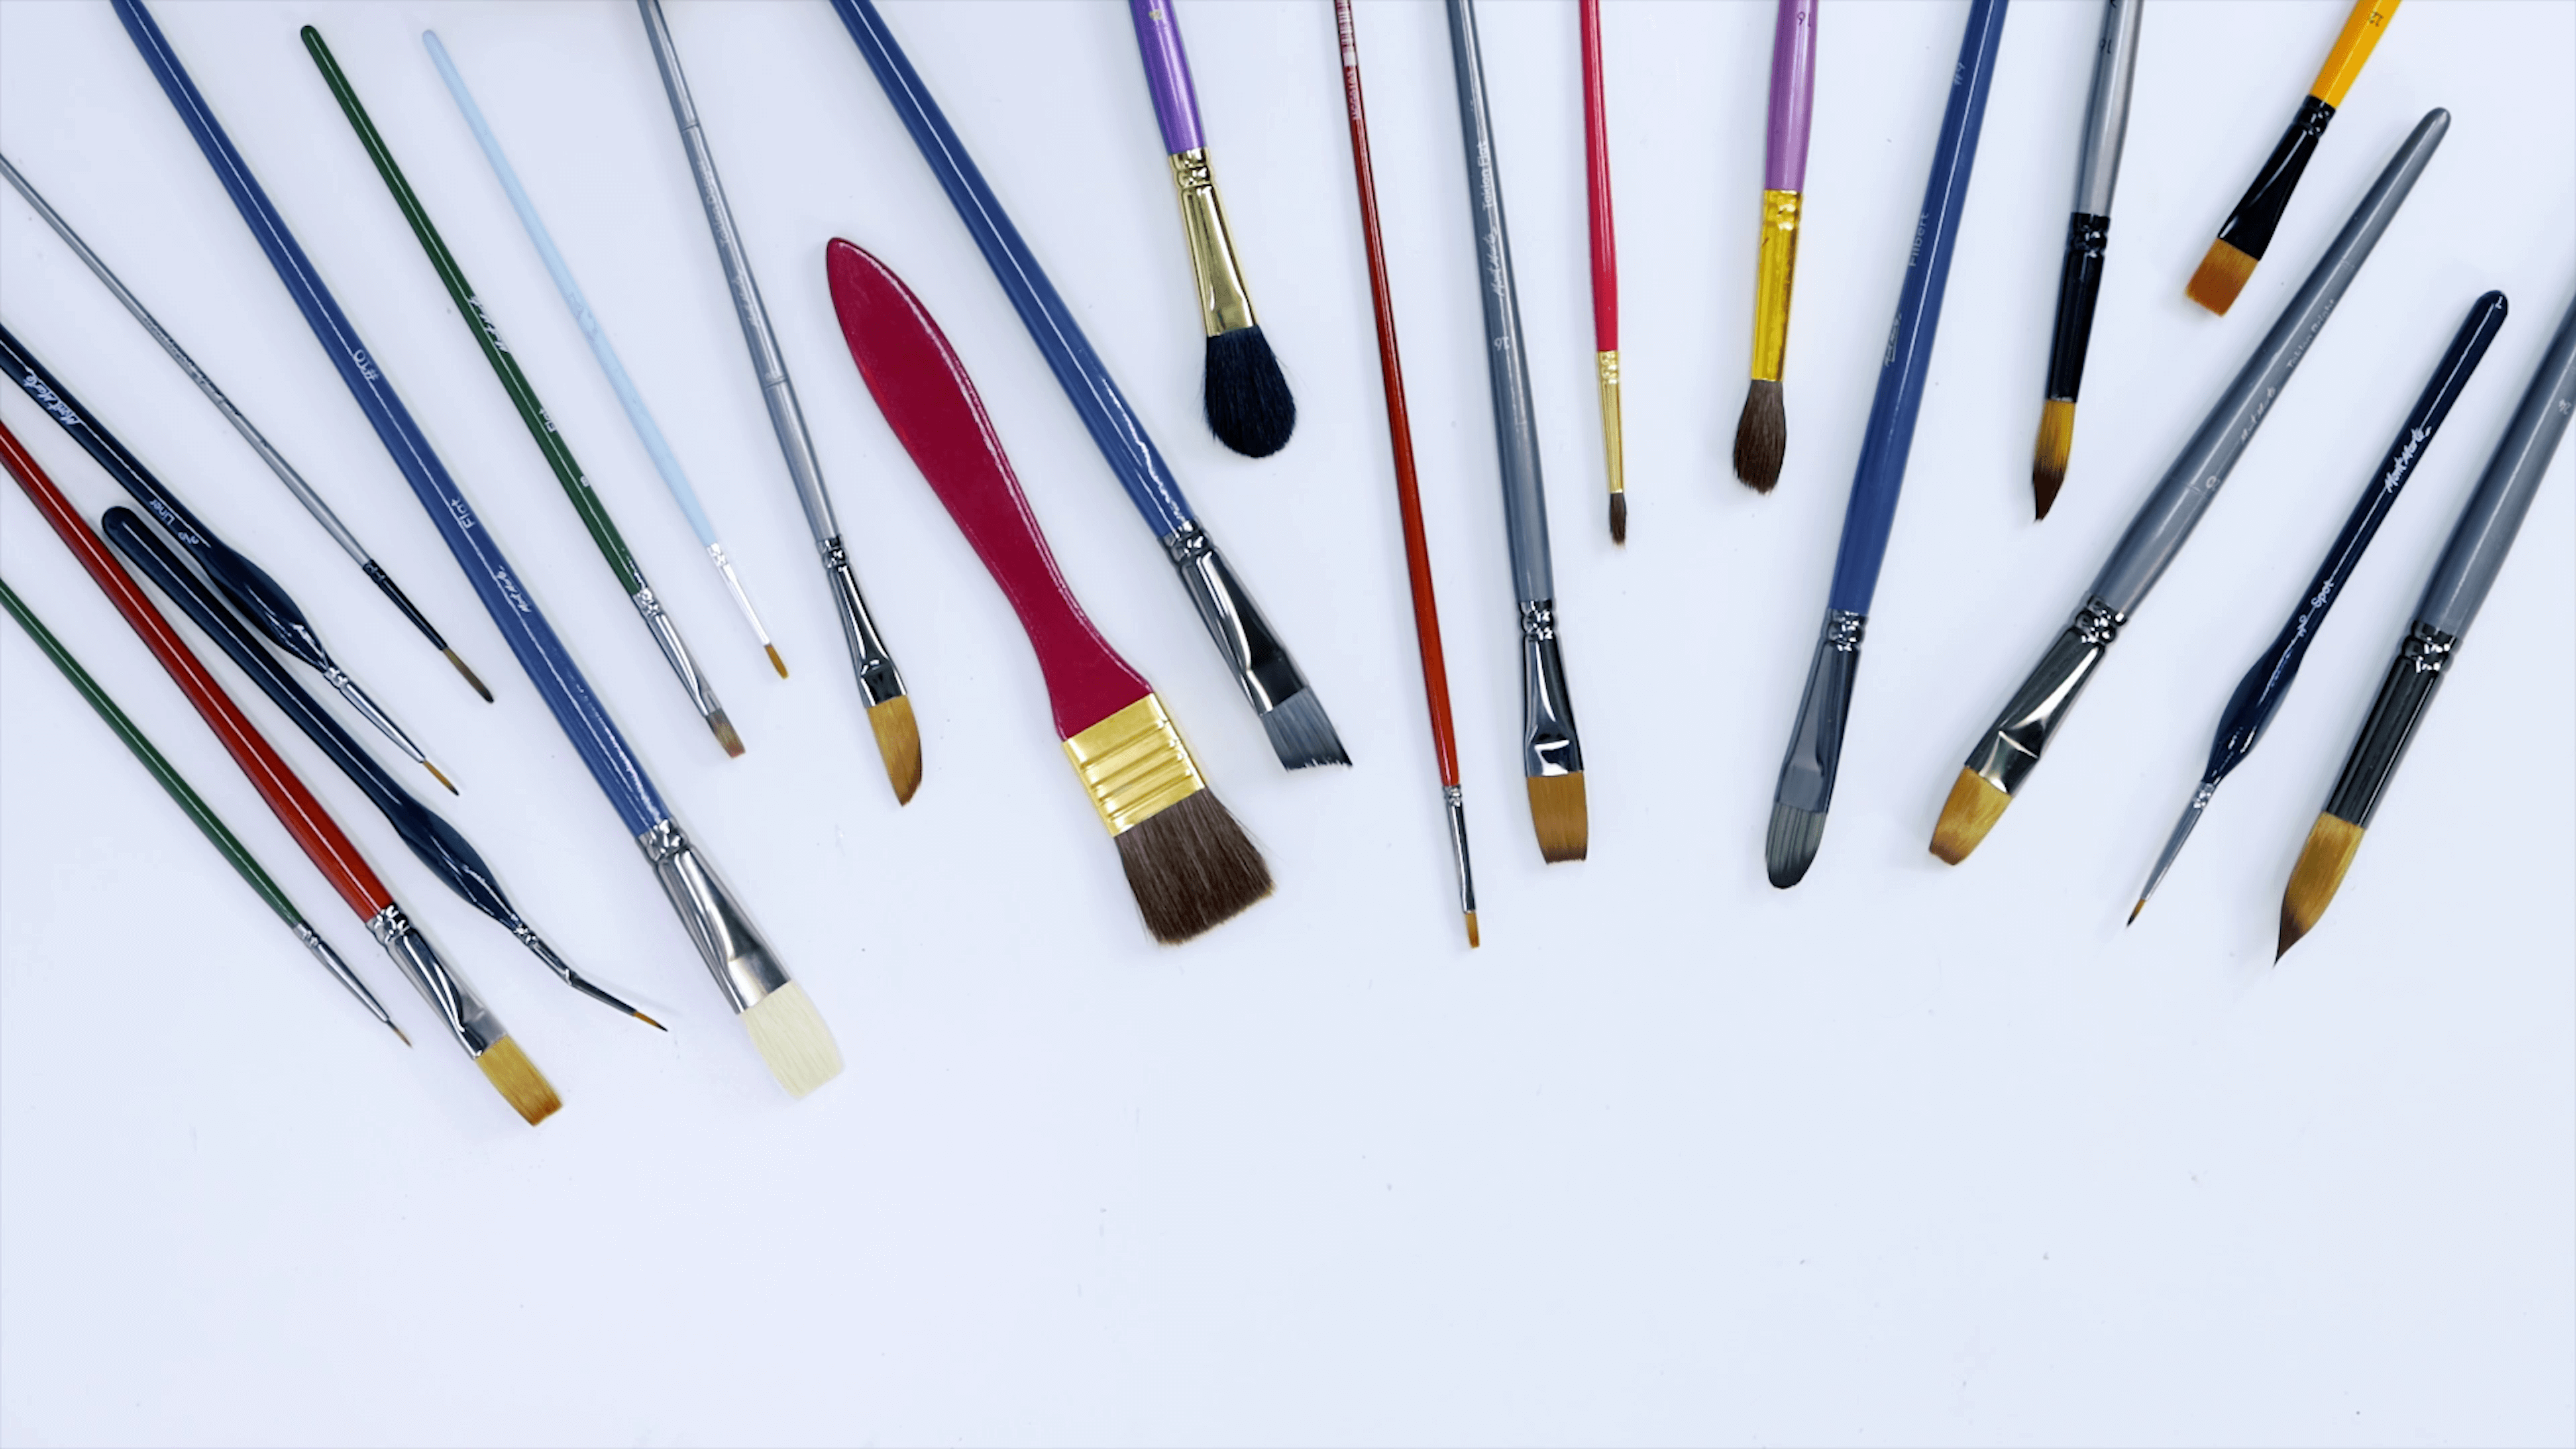 How to Clean Paint Brushes in 2022